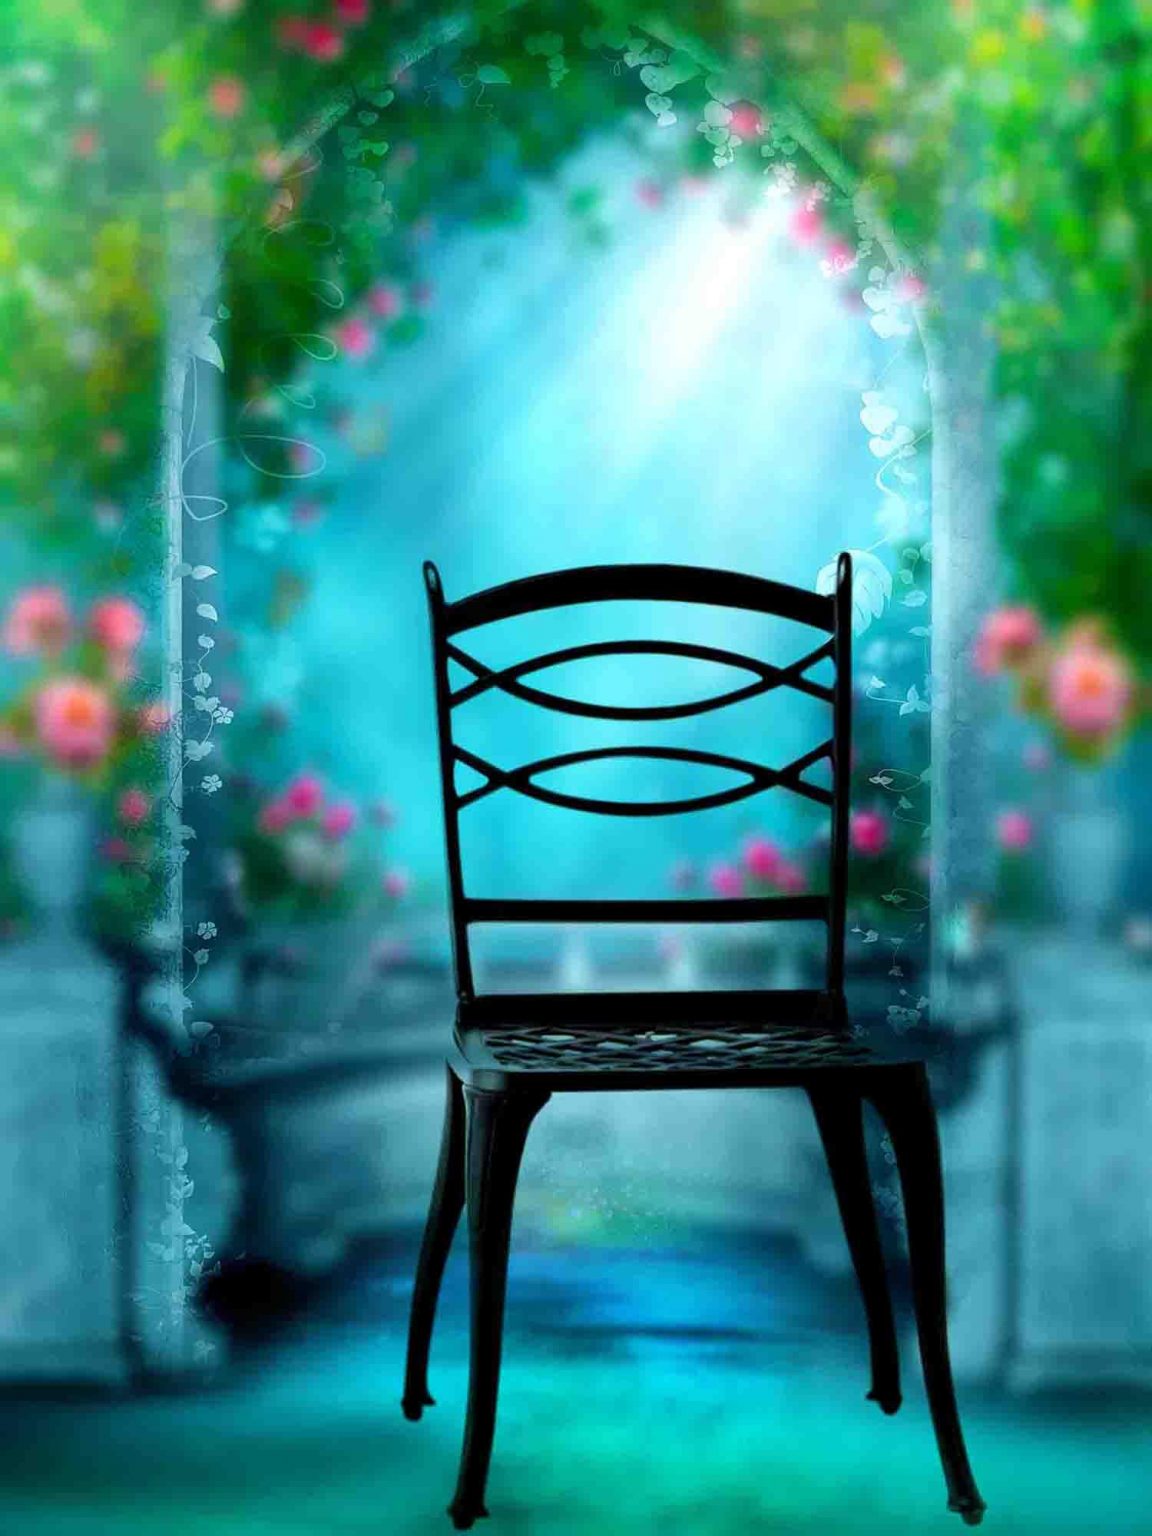  Studio Background With Chair Images Full HD | CBEditz